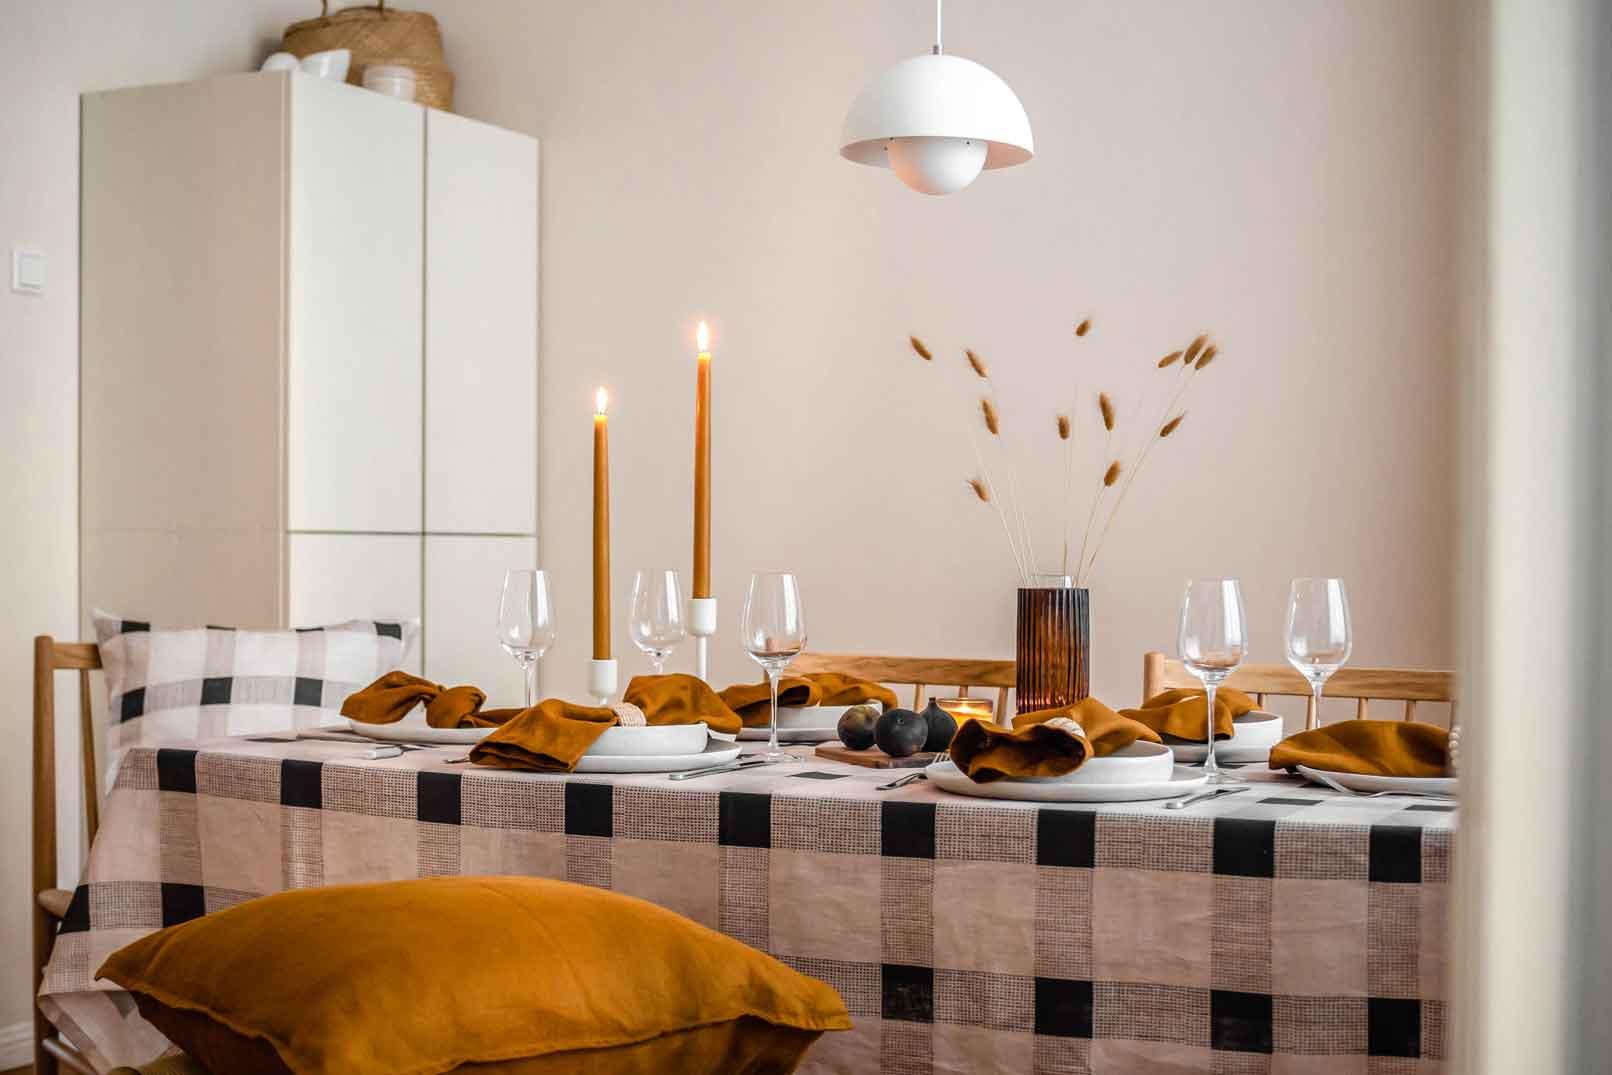 Herbstliches Tablesetting